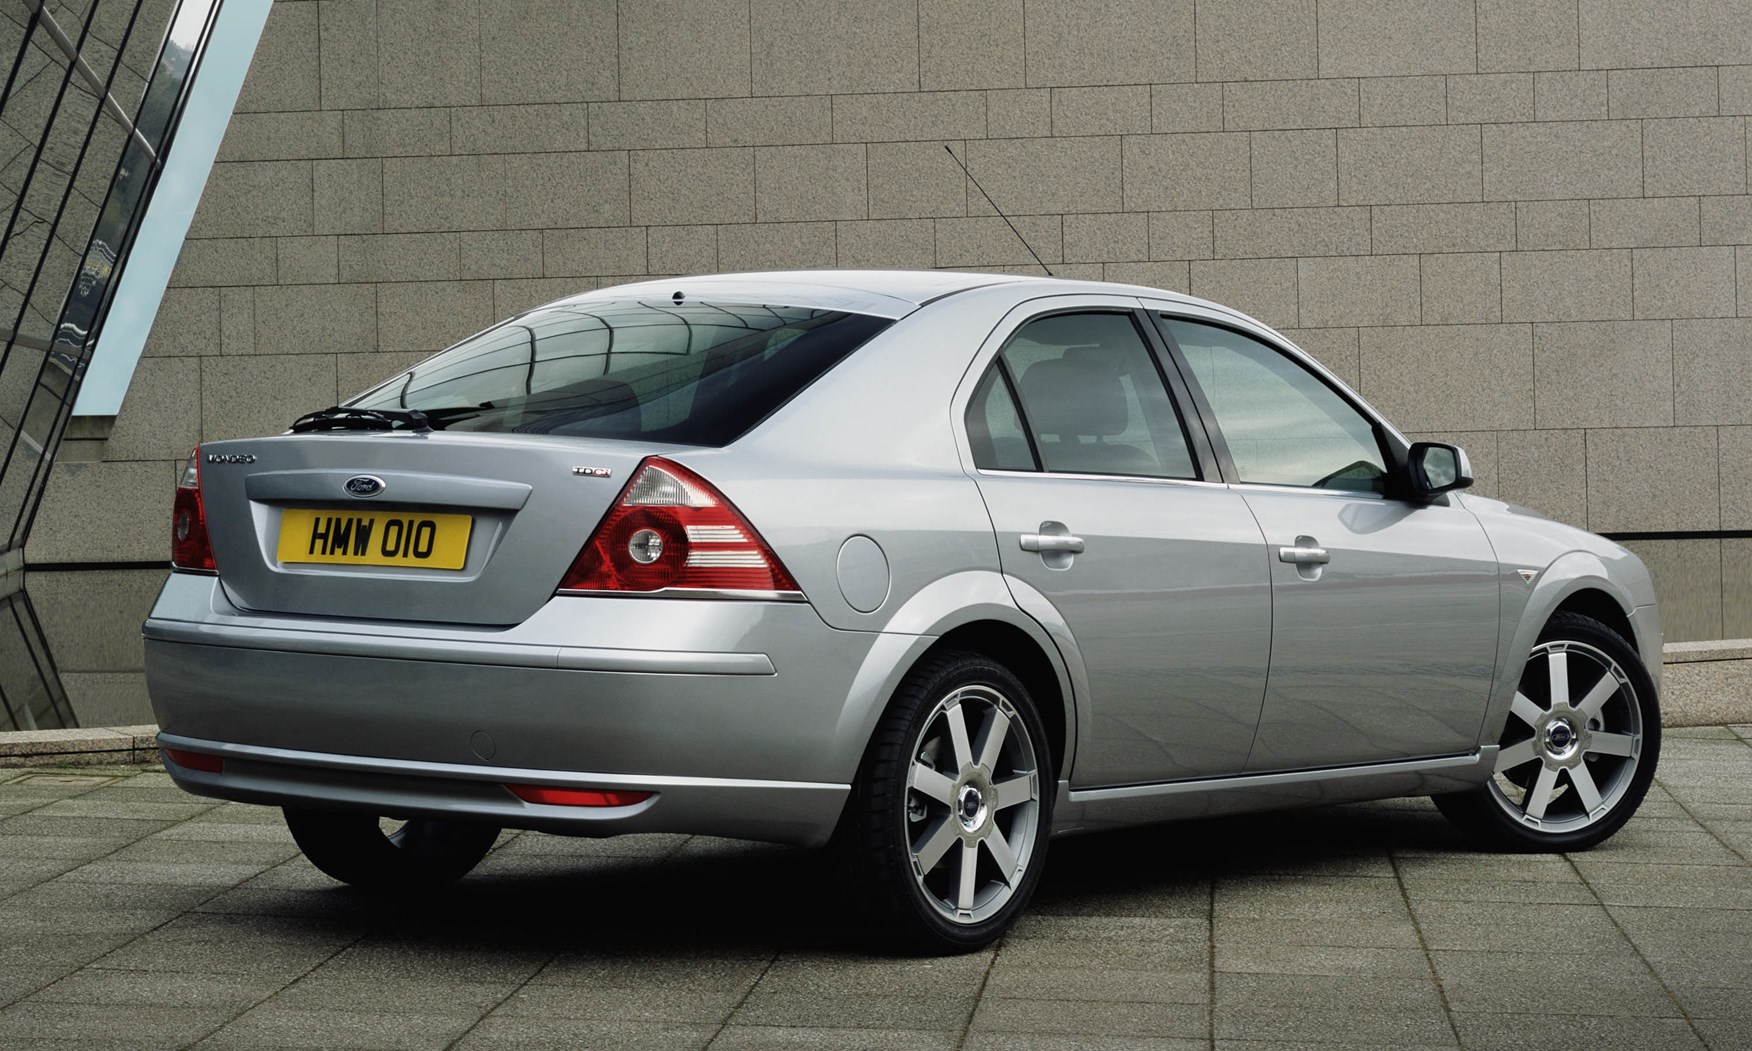 Used Ford Mondeo Hatchback (2000 - 2007) Review | Parkers